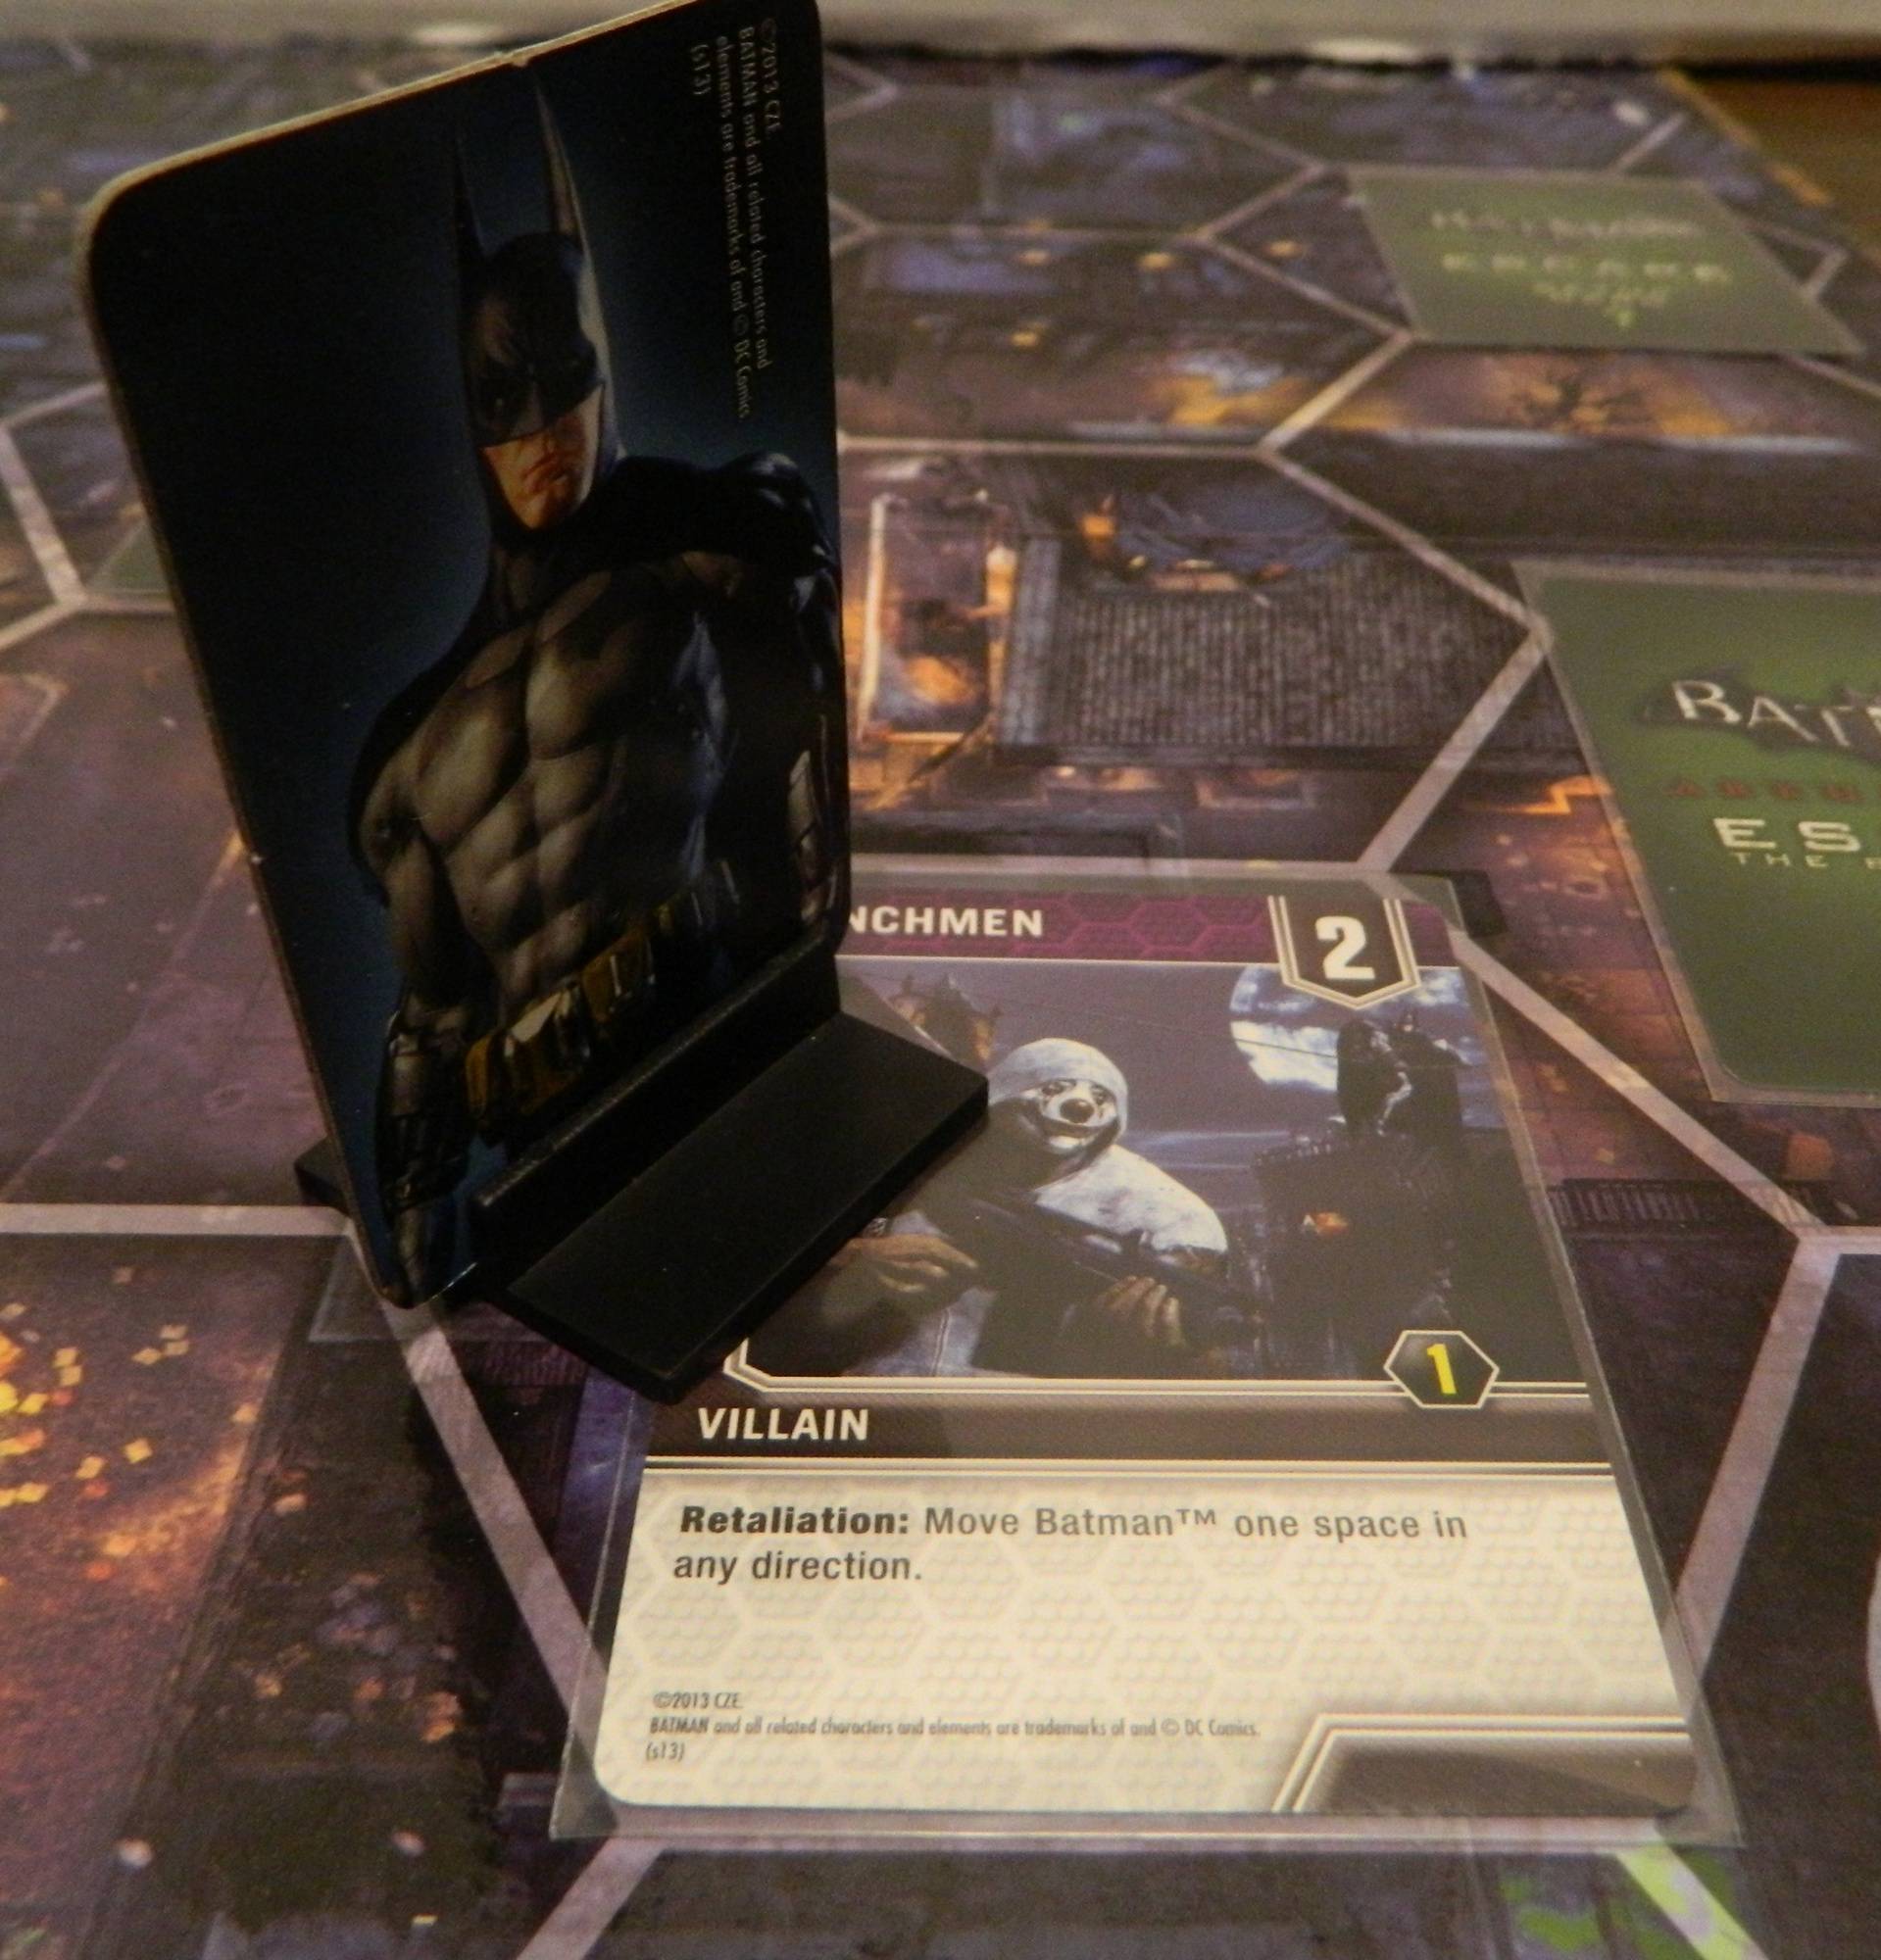 Batman: Arkham City Escape Board Game Review and Rules - Geeky Hobbies